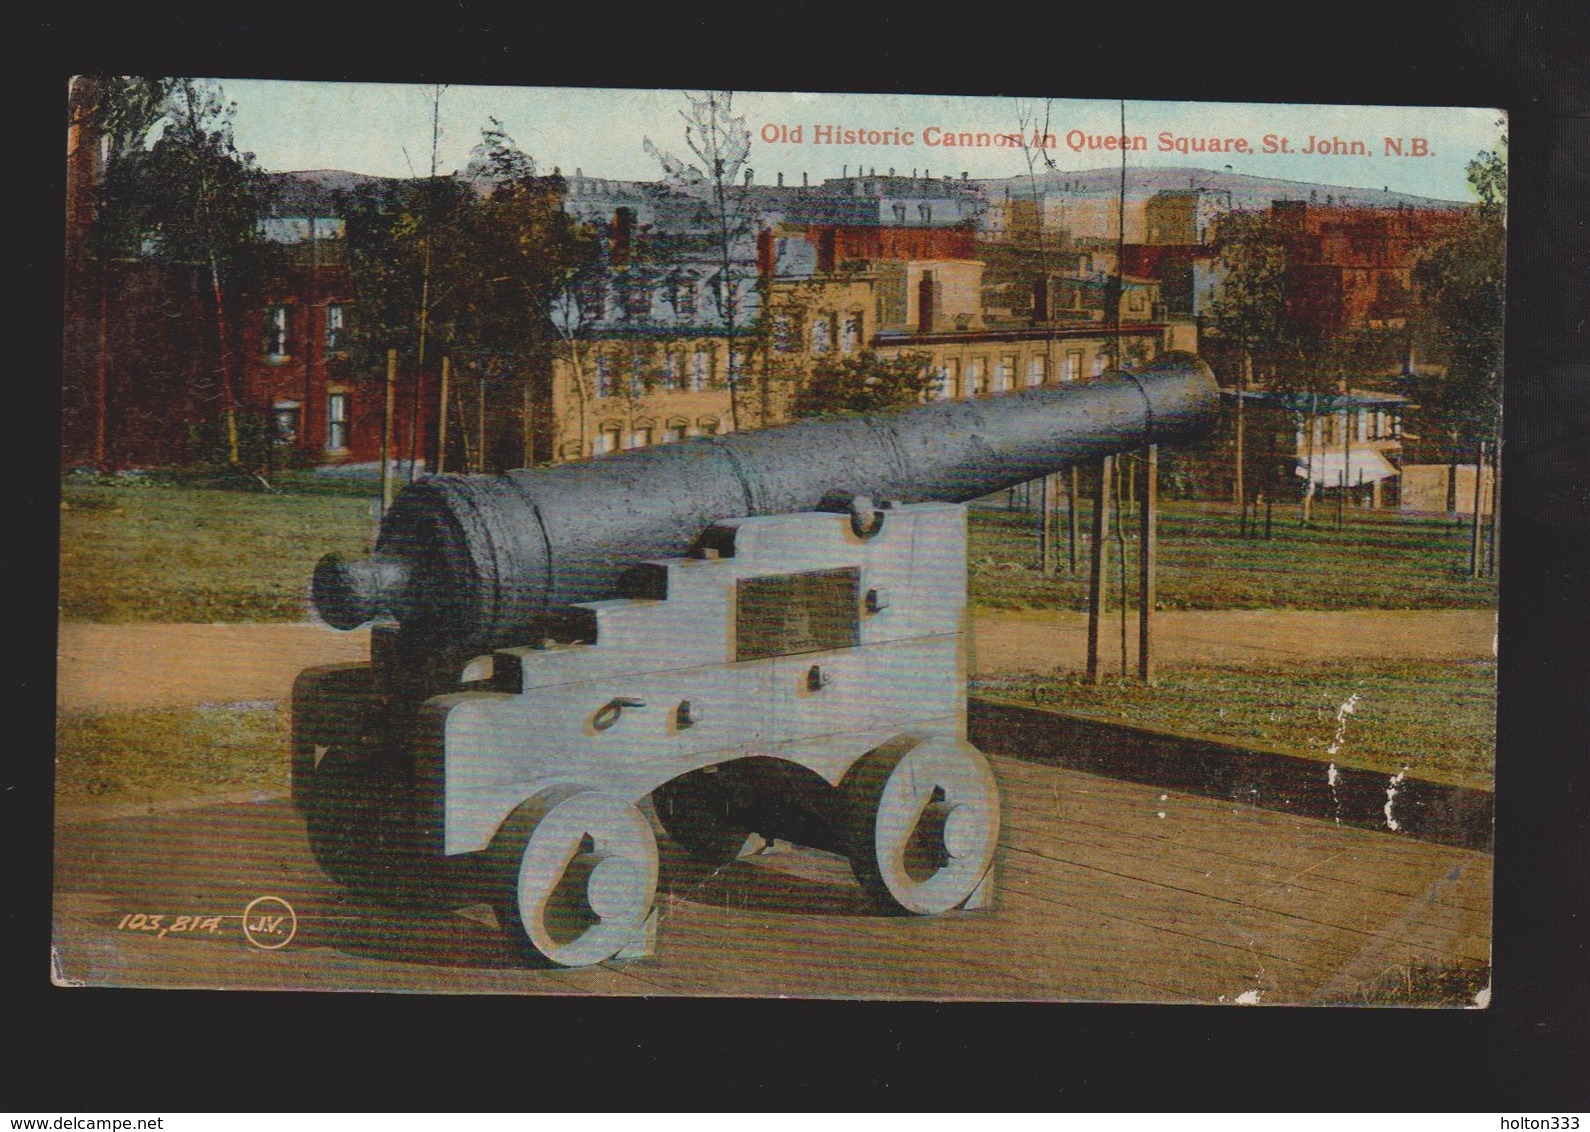 Old Cannon Queen Square, St. John NB - 1910s - Unused - Some Wear - St. John